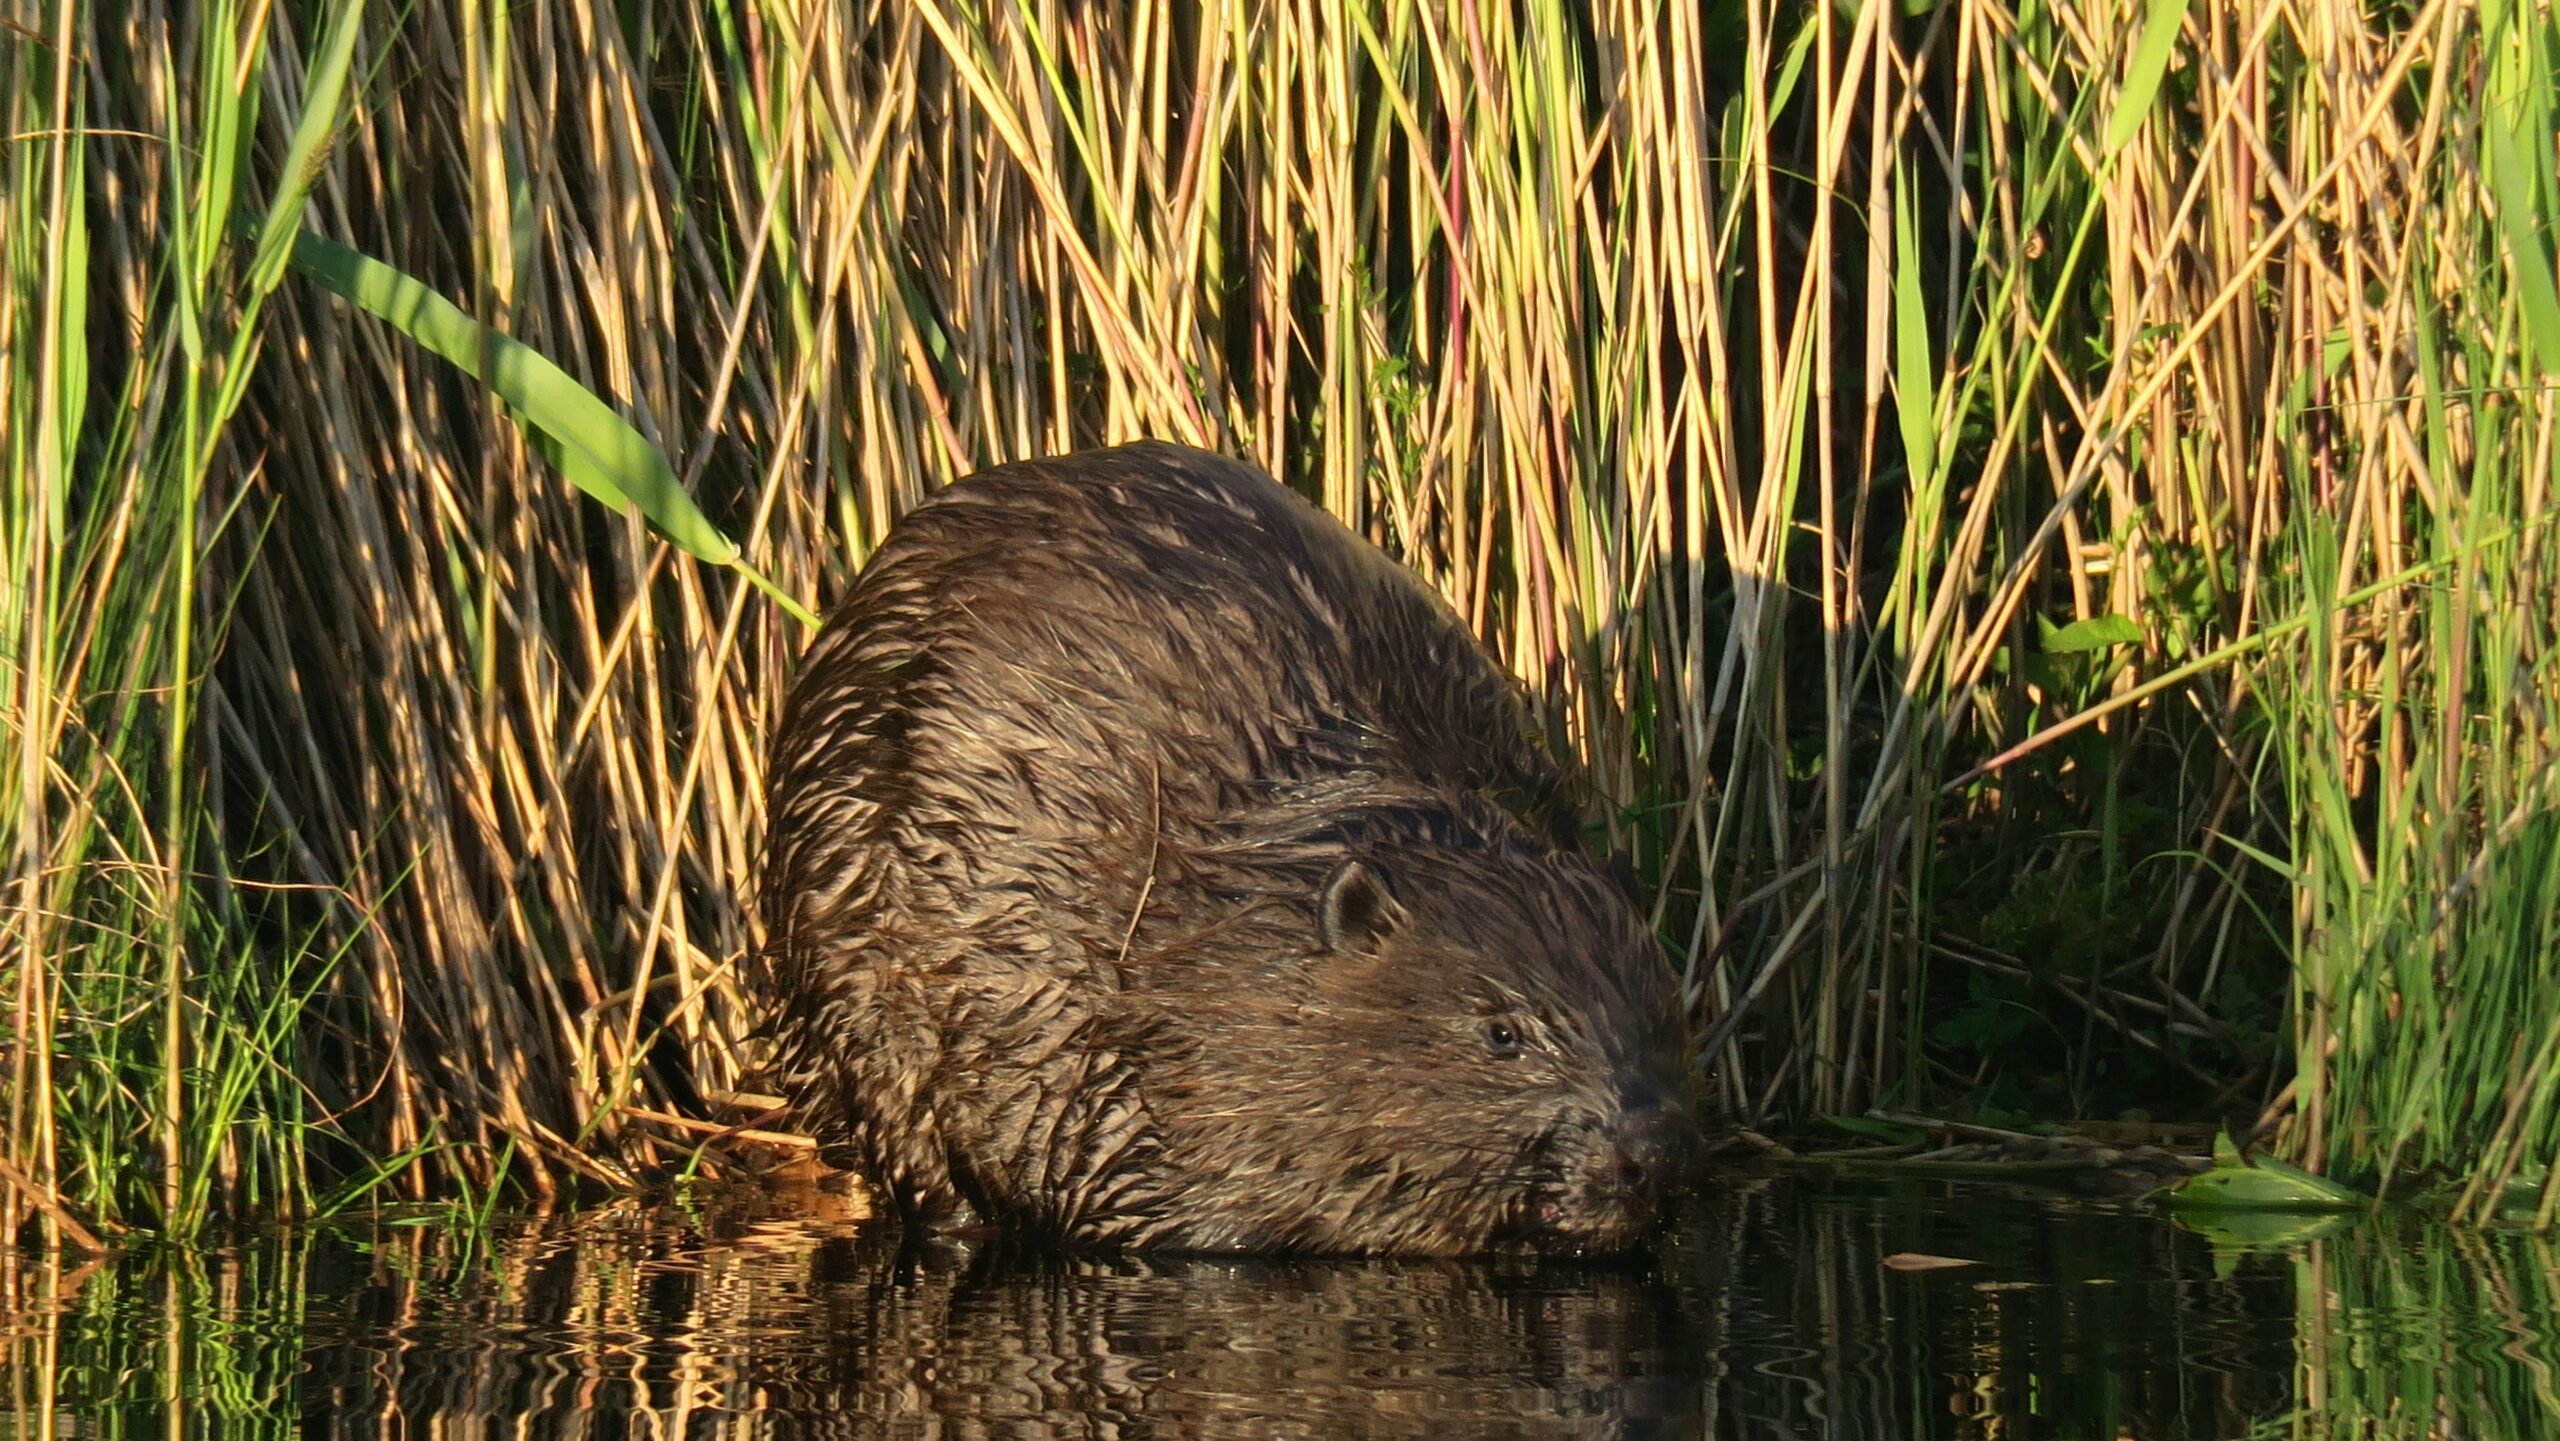 a beaver swimming in a pond surrounded by tall grass